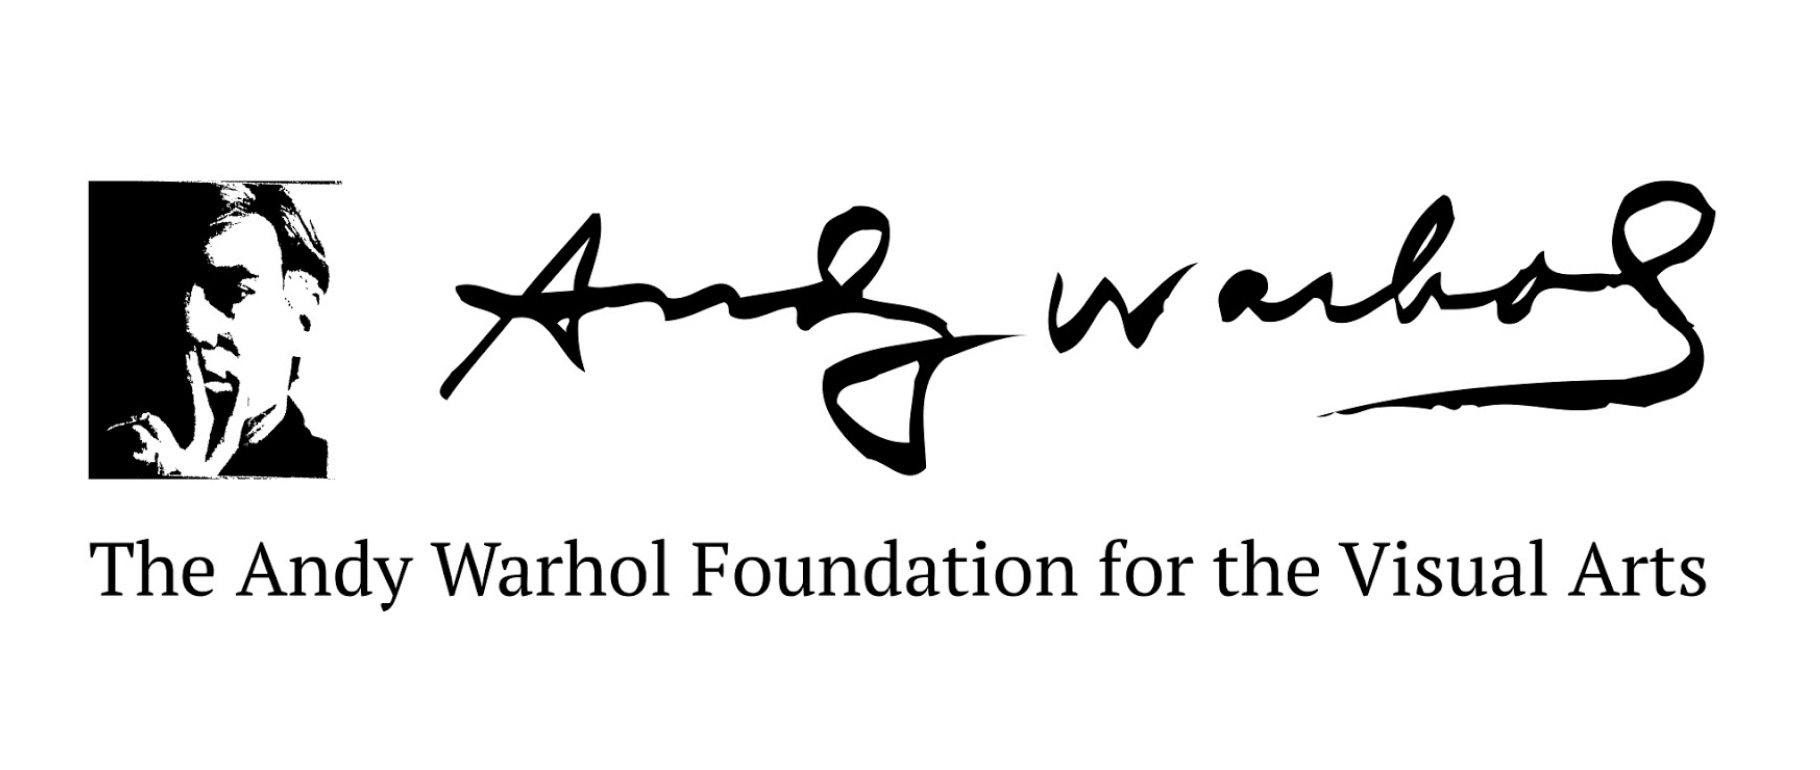 Andy Warhol Foundation for the Visual Arts logo